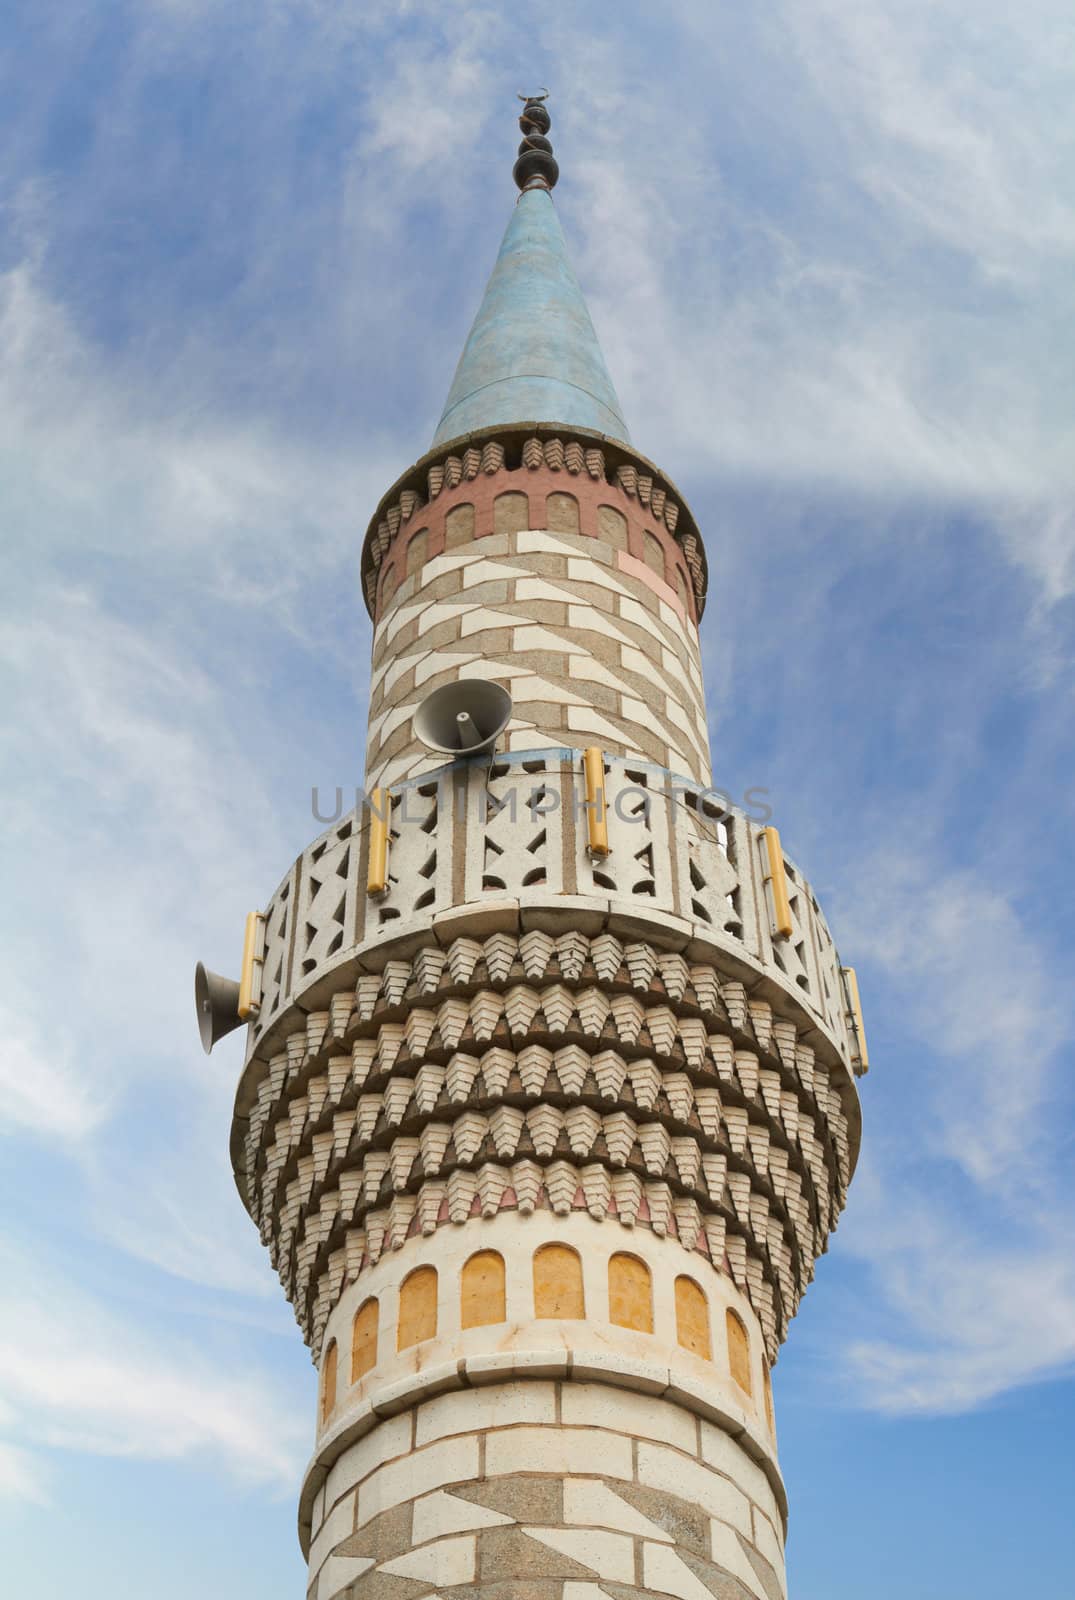 Minaret and blue, clear, cloudy sky.